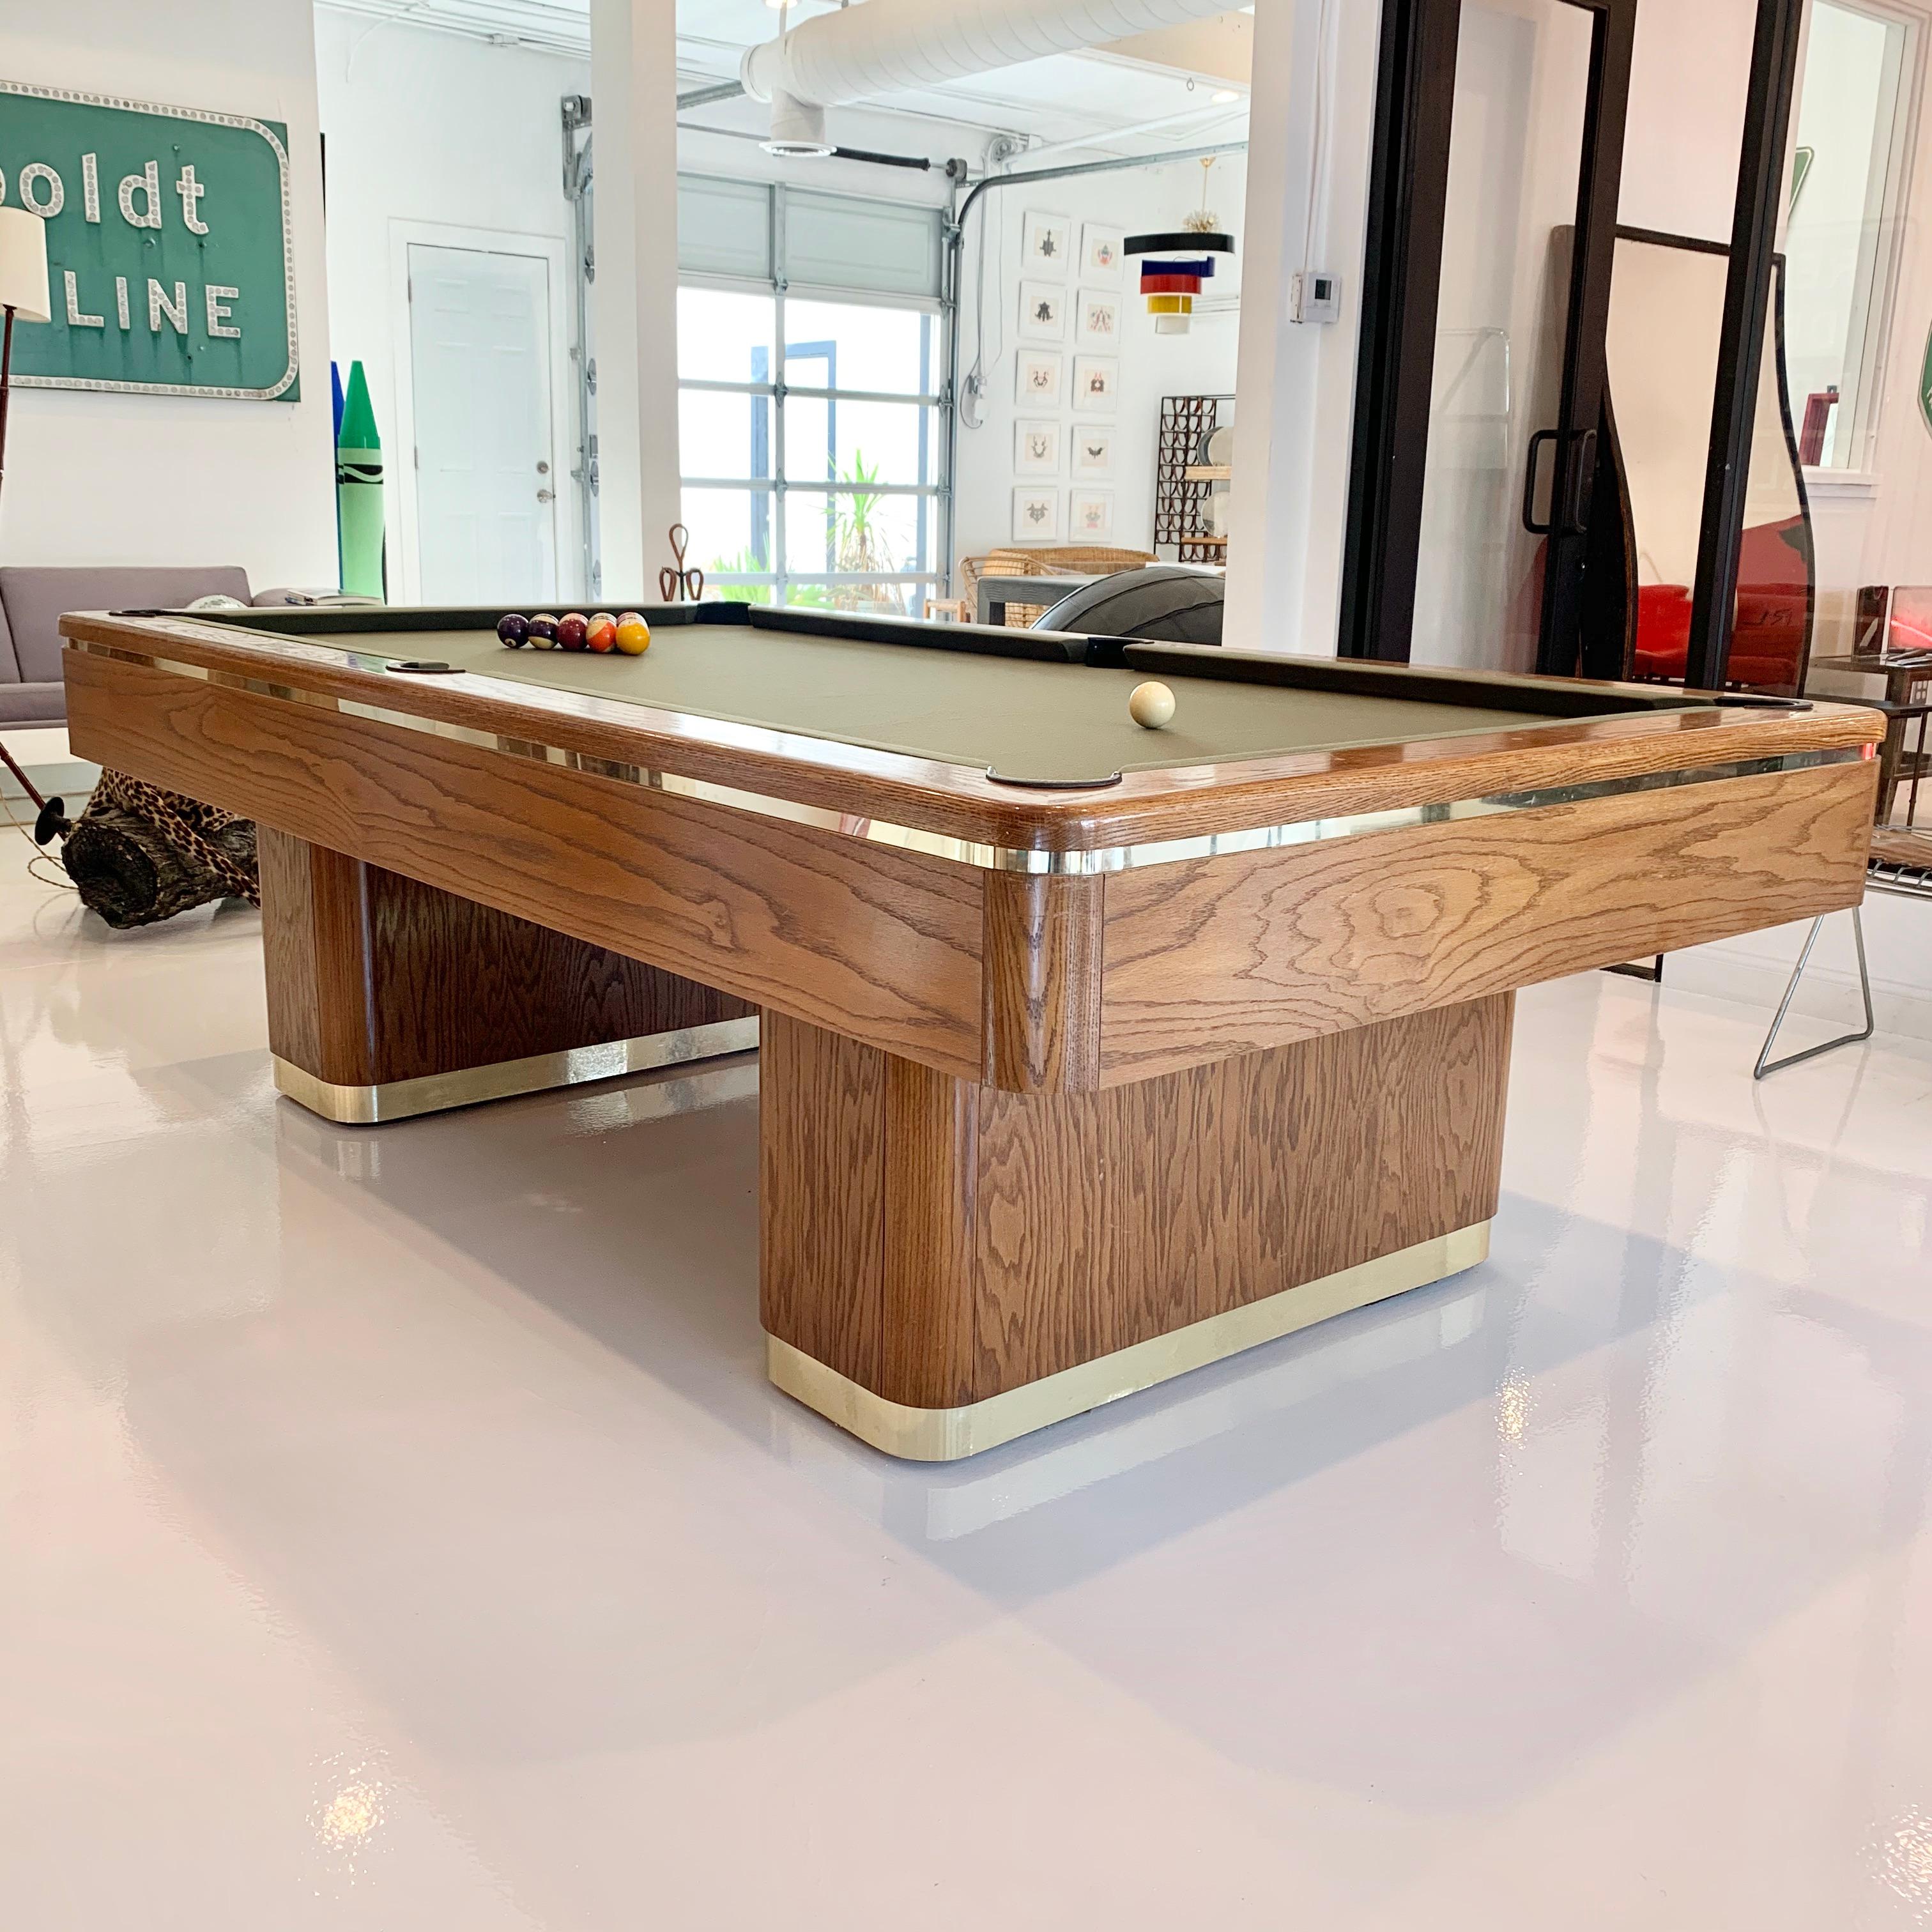 Elegant oak and brass POOL table made in Los Angeles, California. Dated 11-4-86. Good condition with some wear to wood and brass. New bumpers and new olive tournament felt. 8-foot table. 3-piece slate underneath. Custom made back in the 1980s.